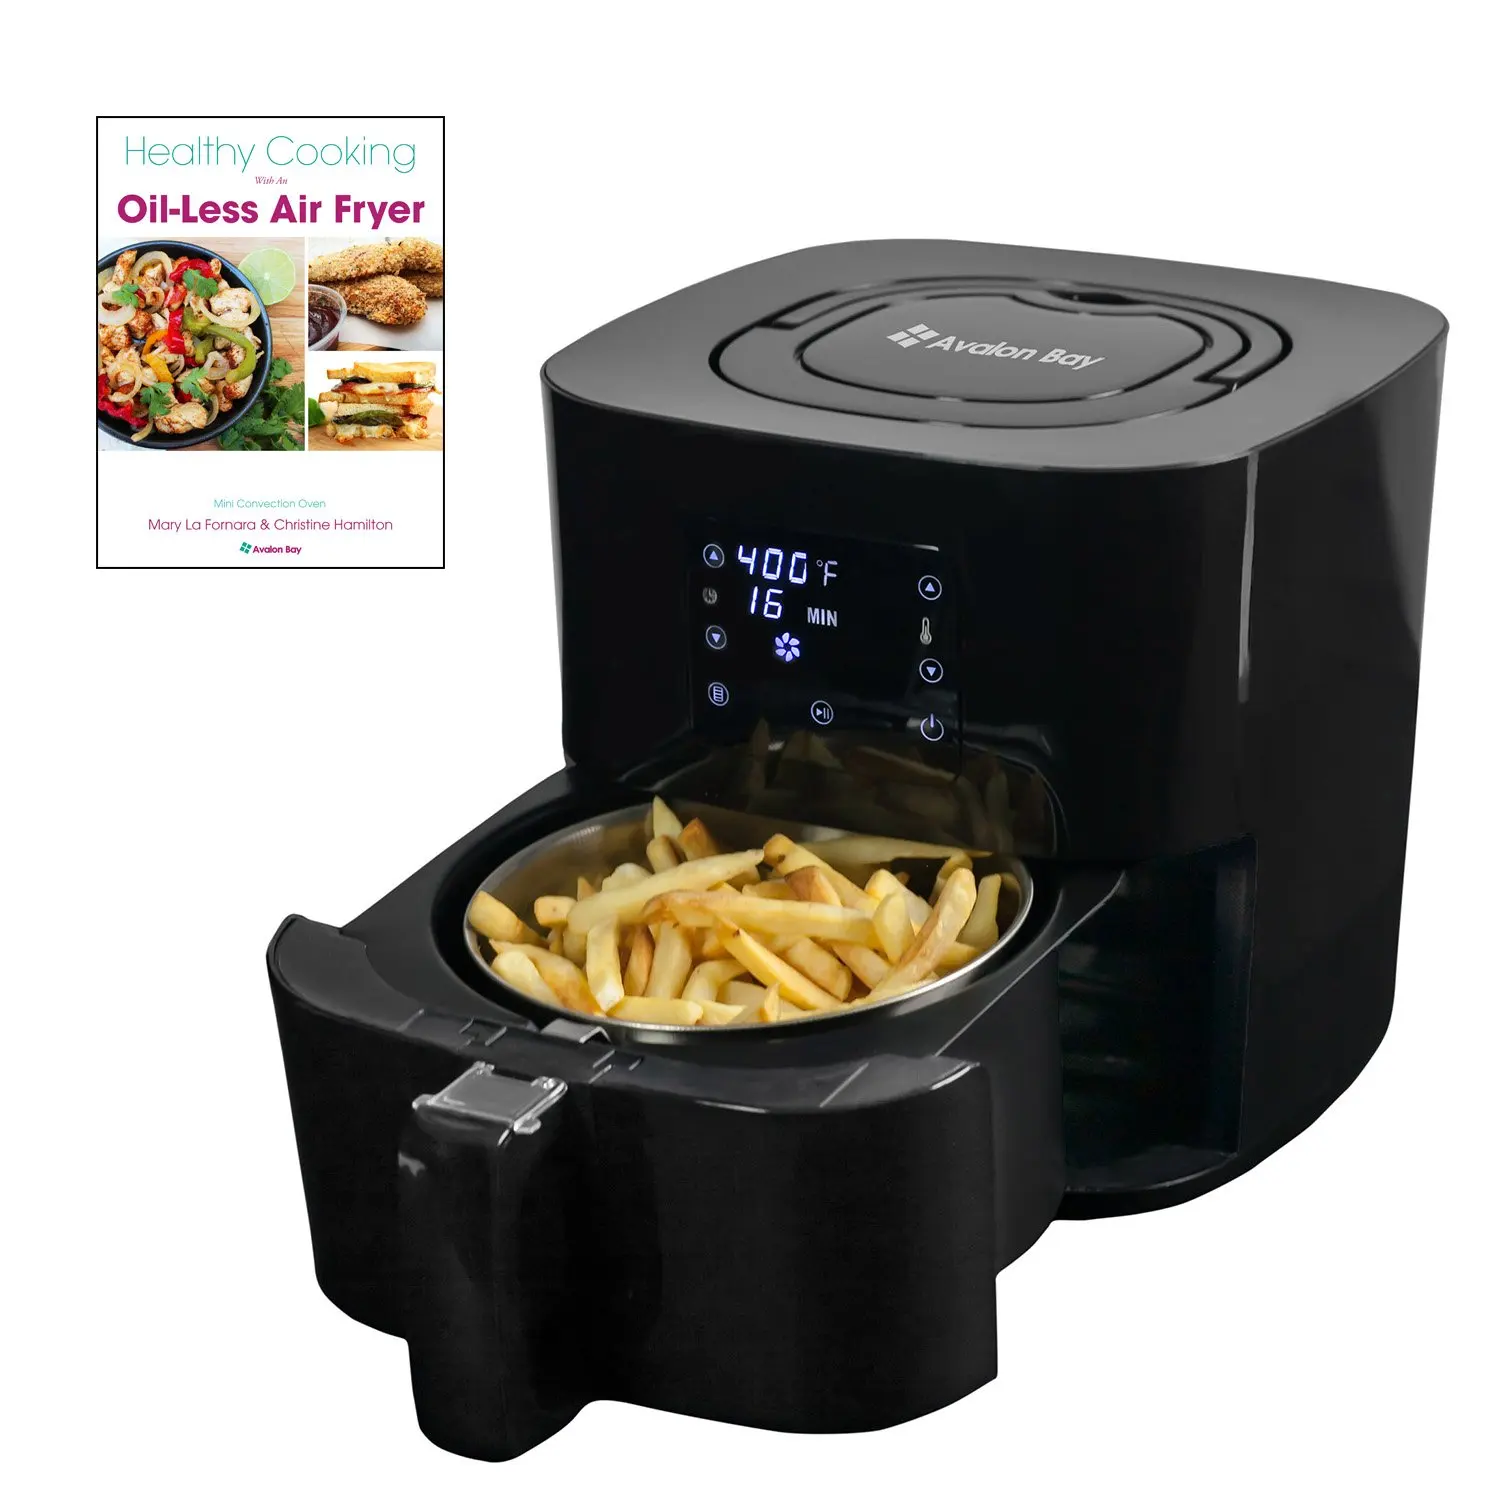 Luckily, the Avalon Bay Air fryer AF25BSS allows you to make healthy fried ...